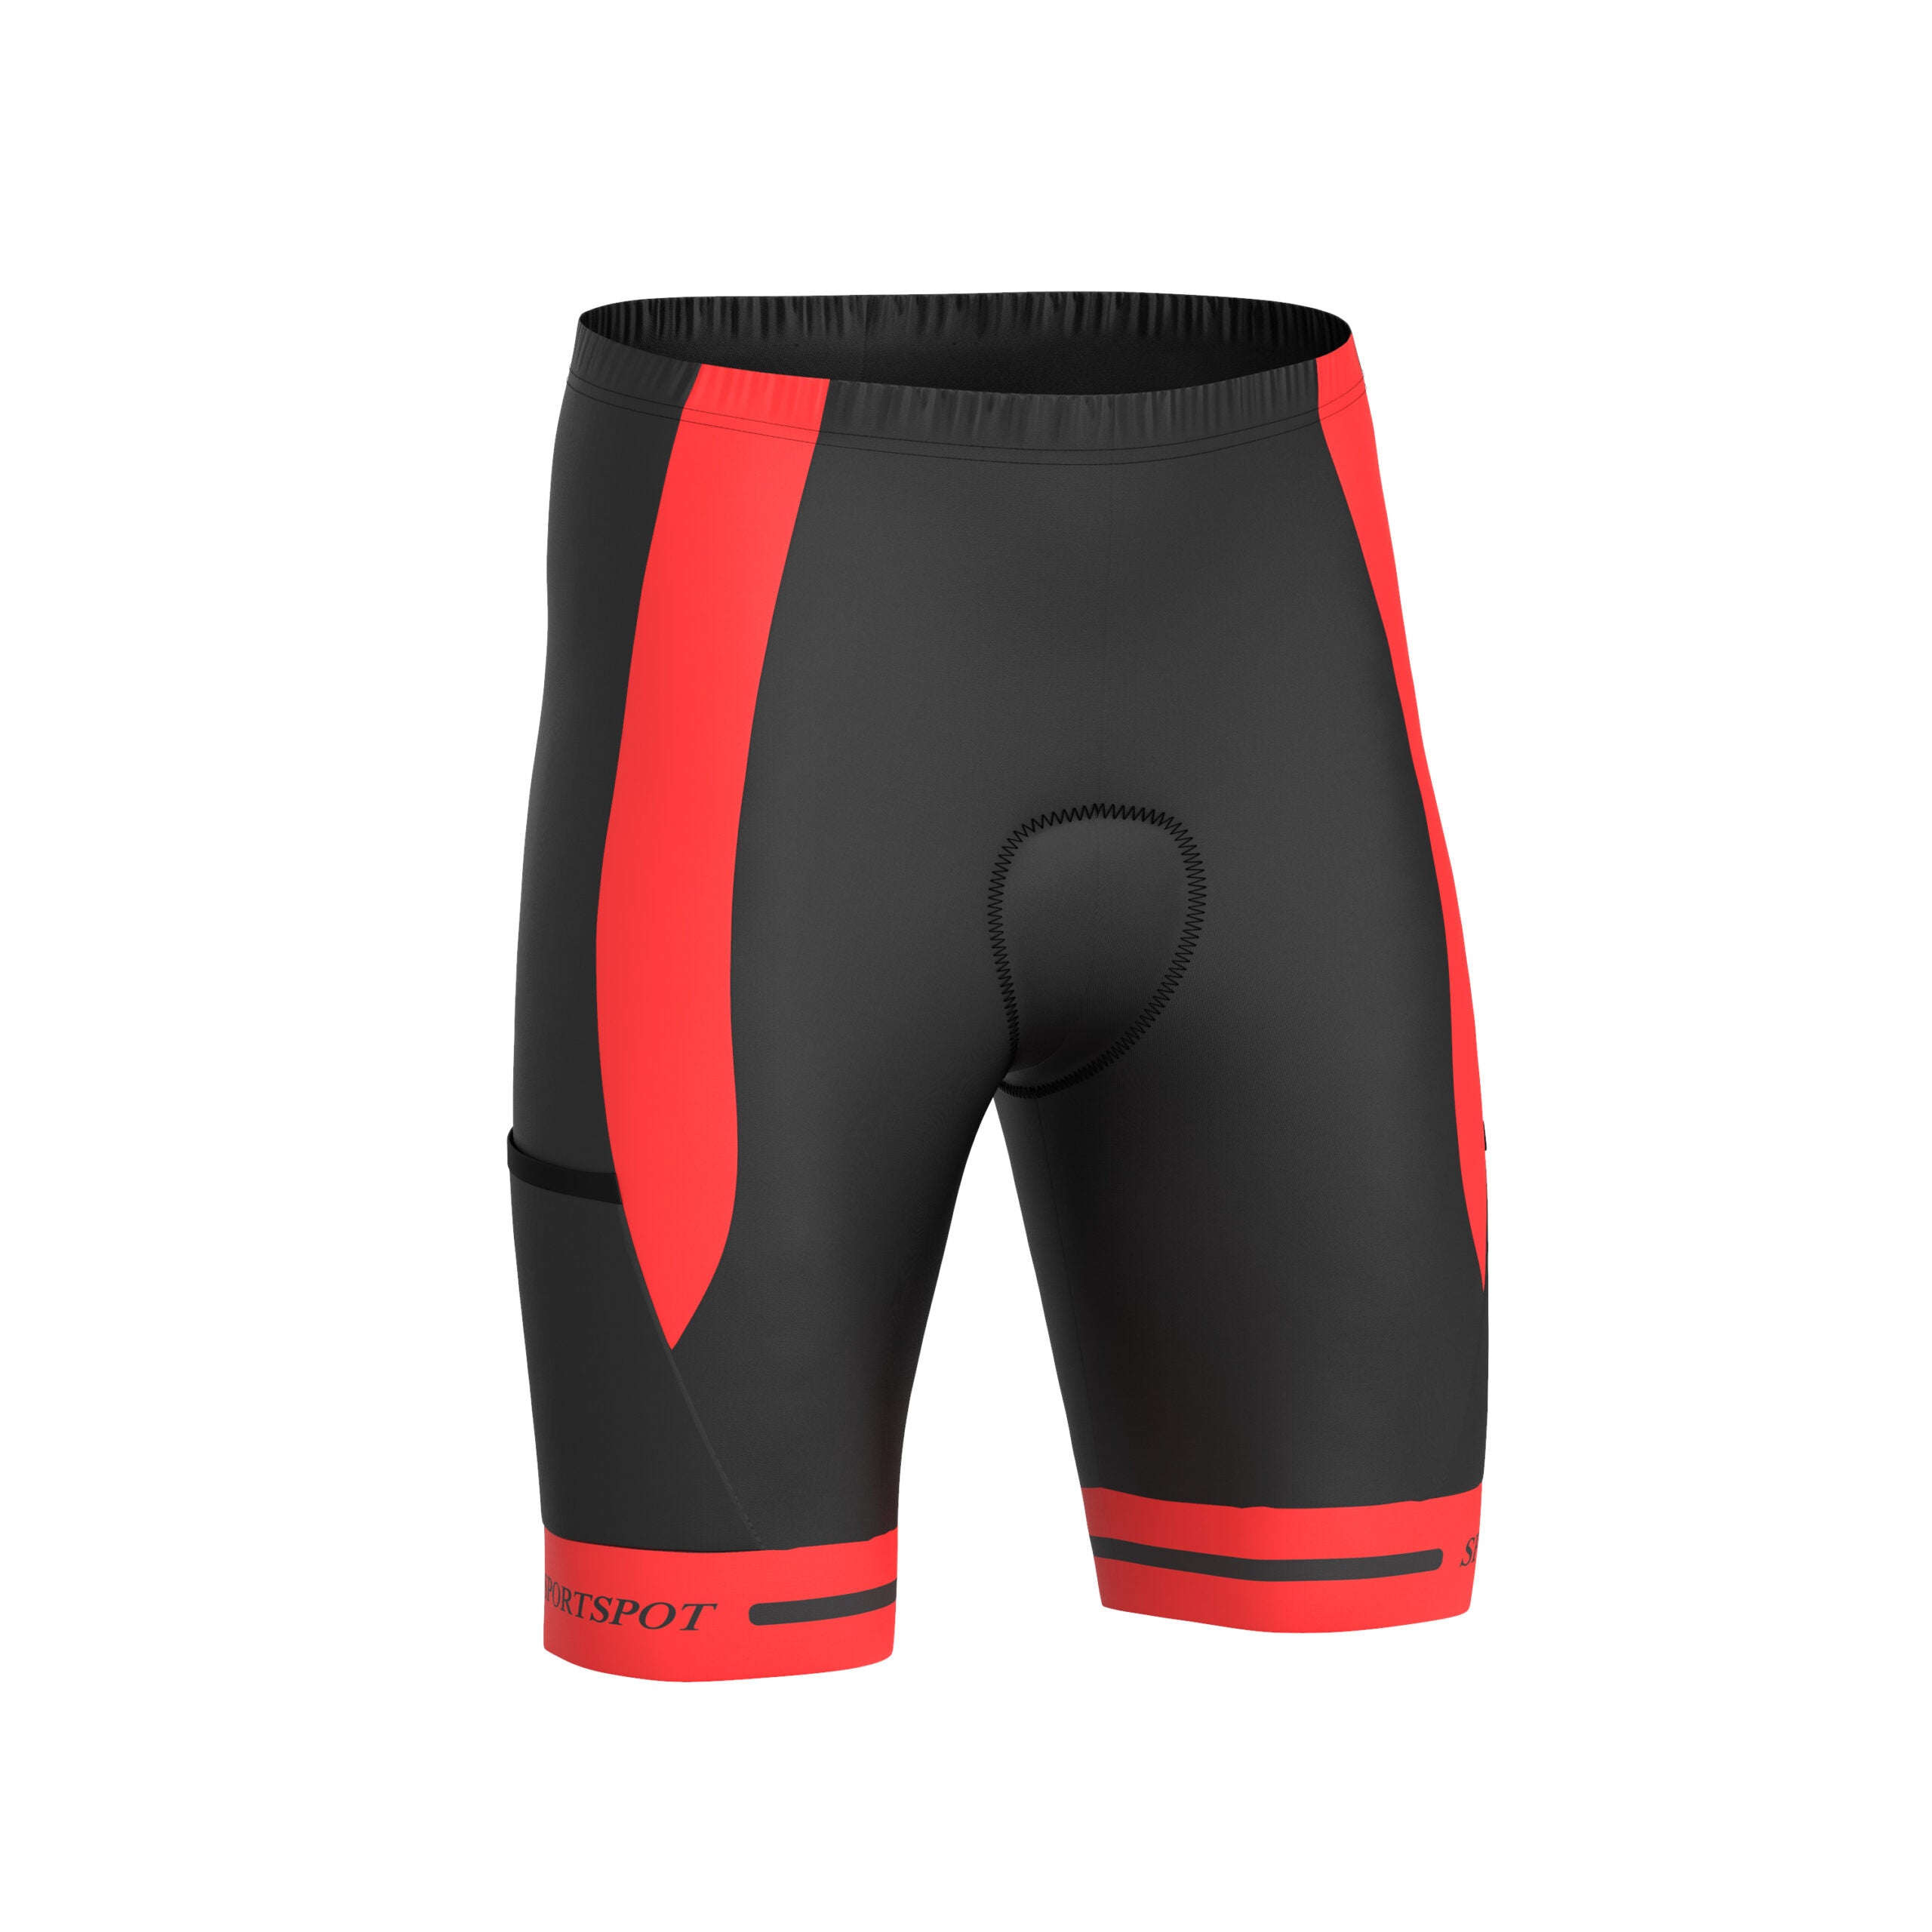 mens cycling shorts with red accents